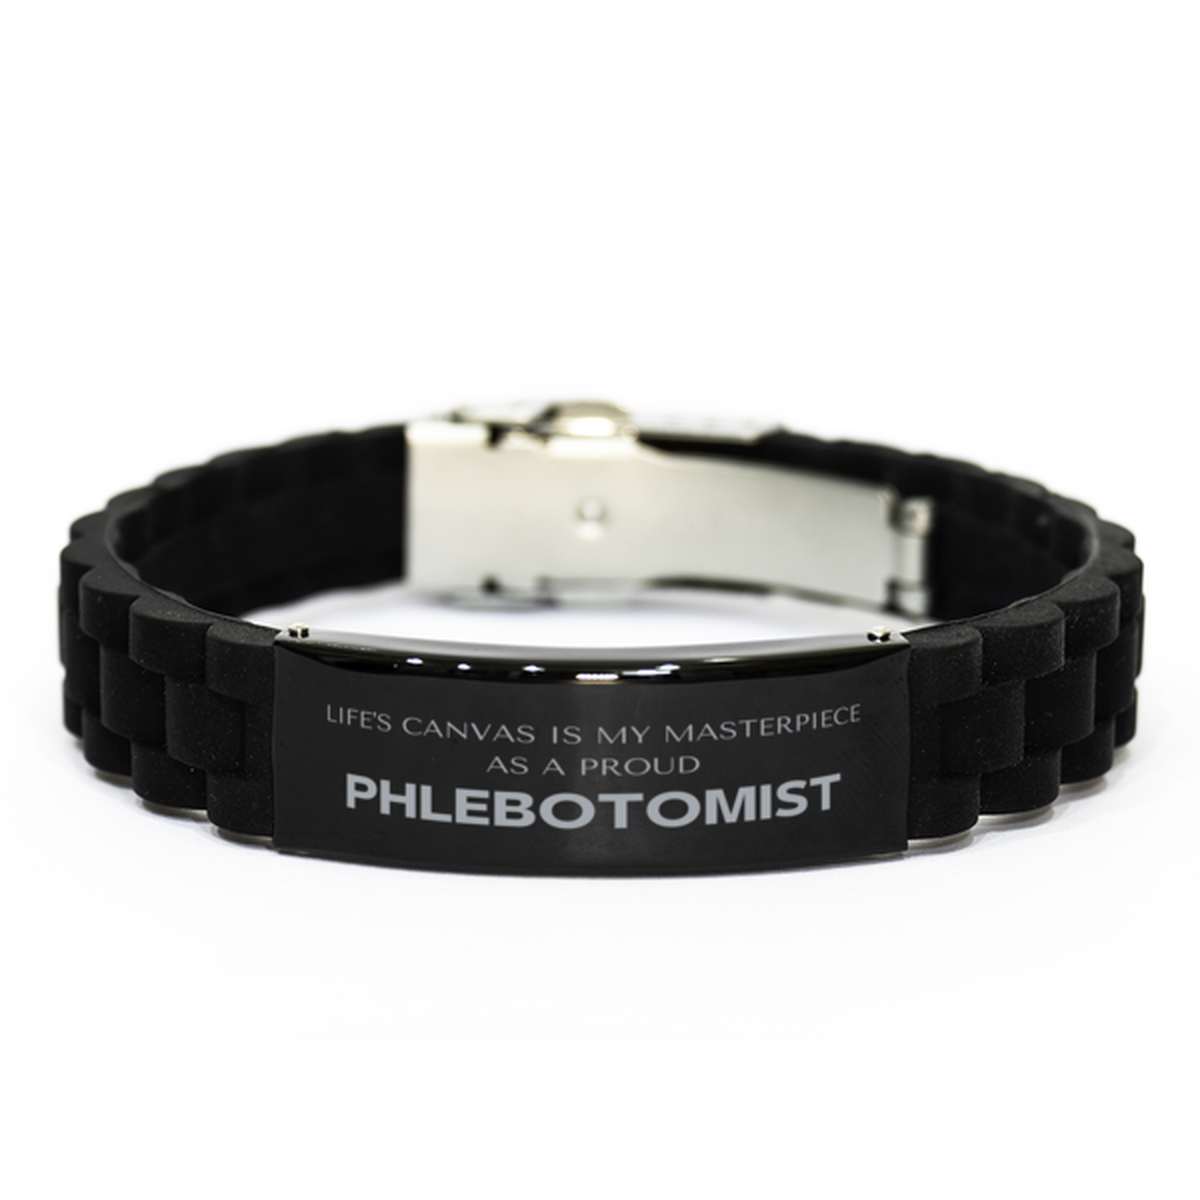 Proud Phlebotomist Gifts, Life's canvas is my masterpiece, Epic Birthday Christmas Unique Black Glidelock Clasp Bracelet For Phlebotomist, Coworkers, Men, Women, Friends